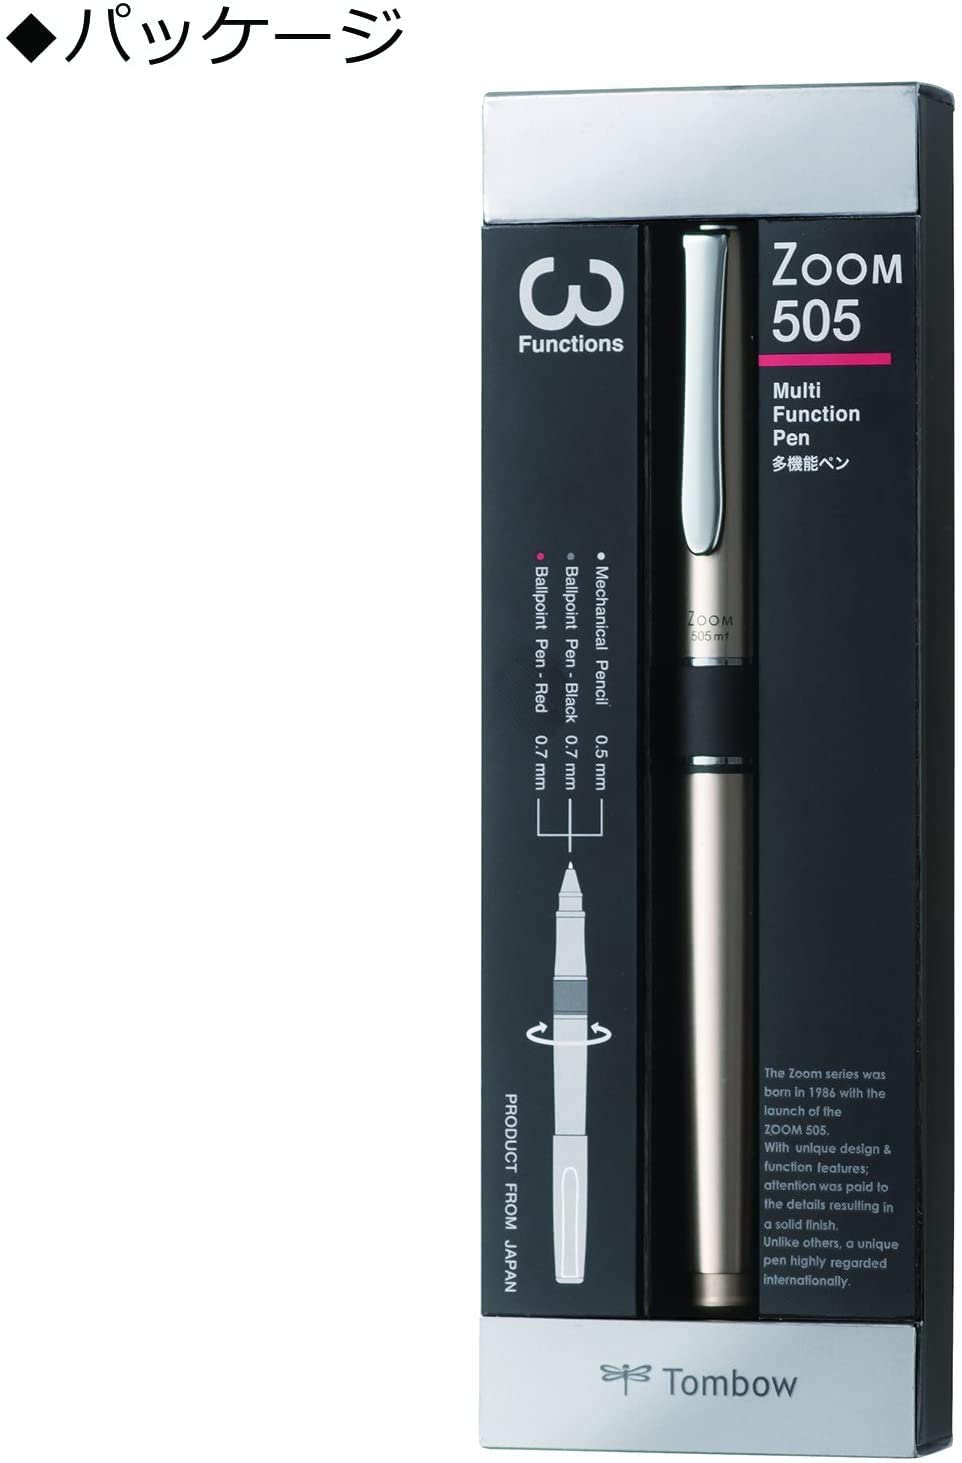 Tombow Zoom 505bc Ballpoint Pen Oil-based 0.7mm Silver Body BC-2000CZ F/S Japan 